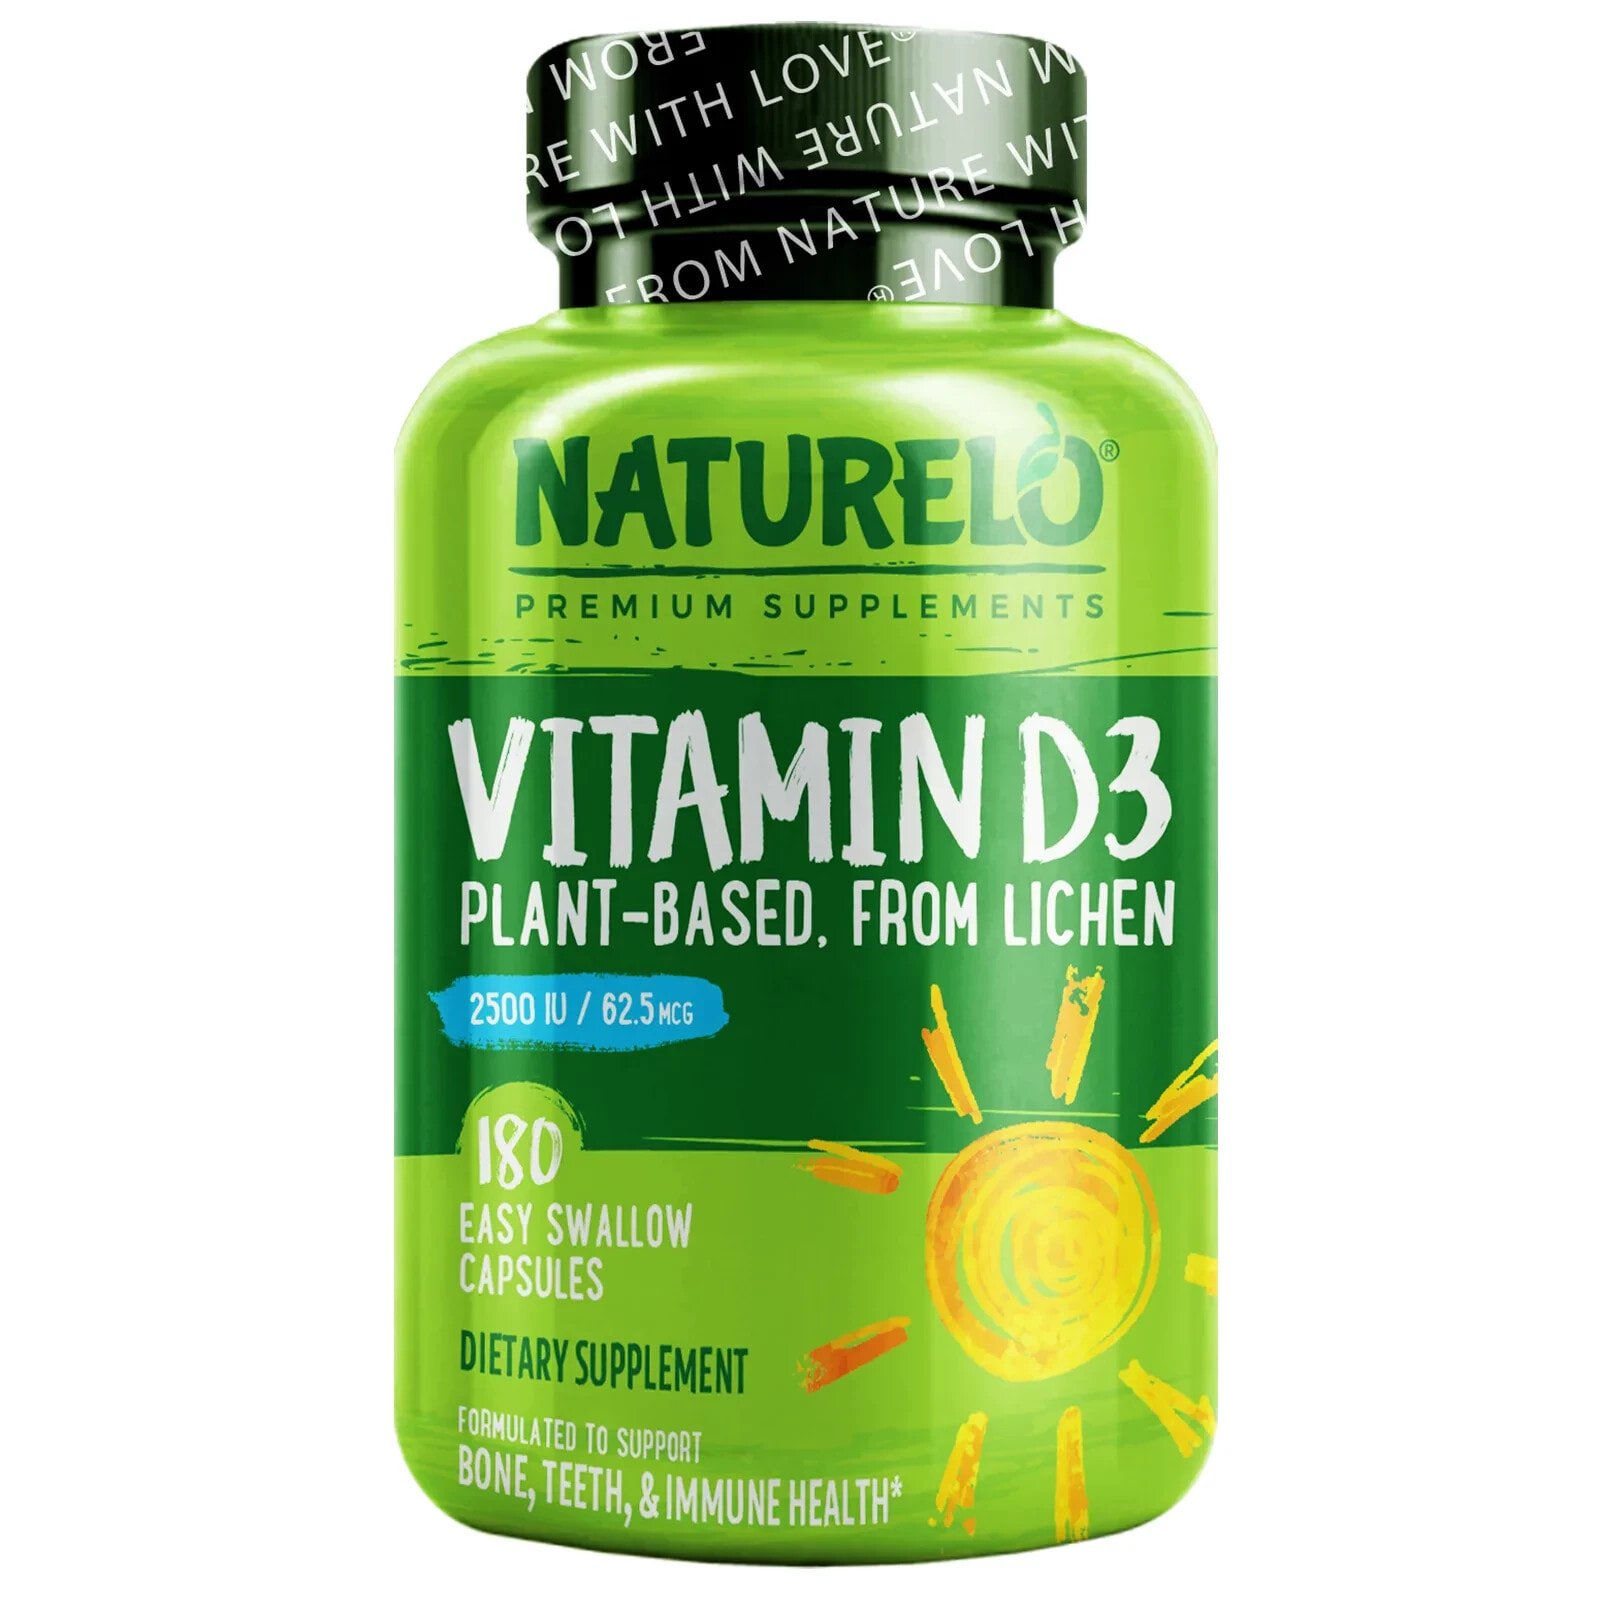 Vitamin D3, Plant-Based from Lichen, 62.5 mcg (2,500 IU), 180 Easy Swallow Capsules